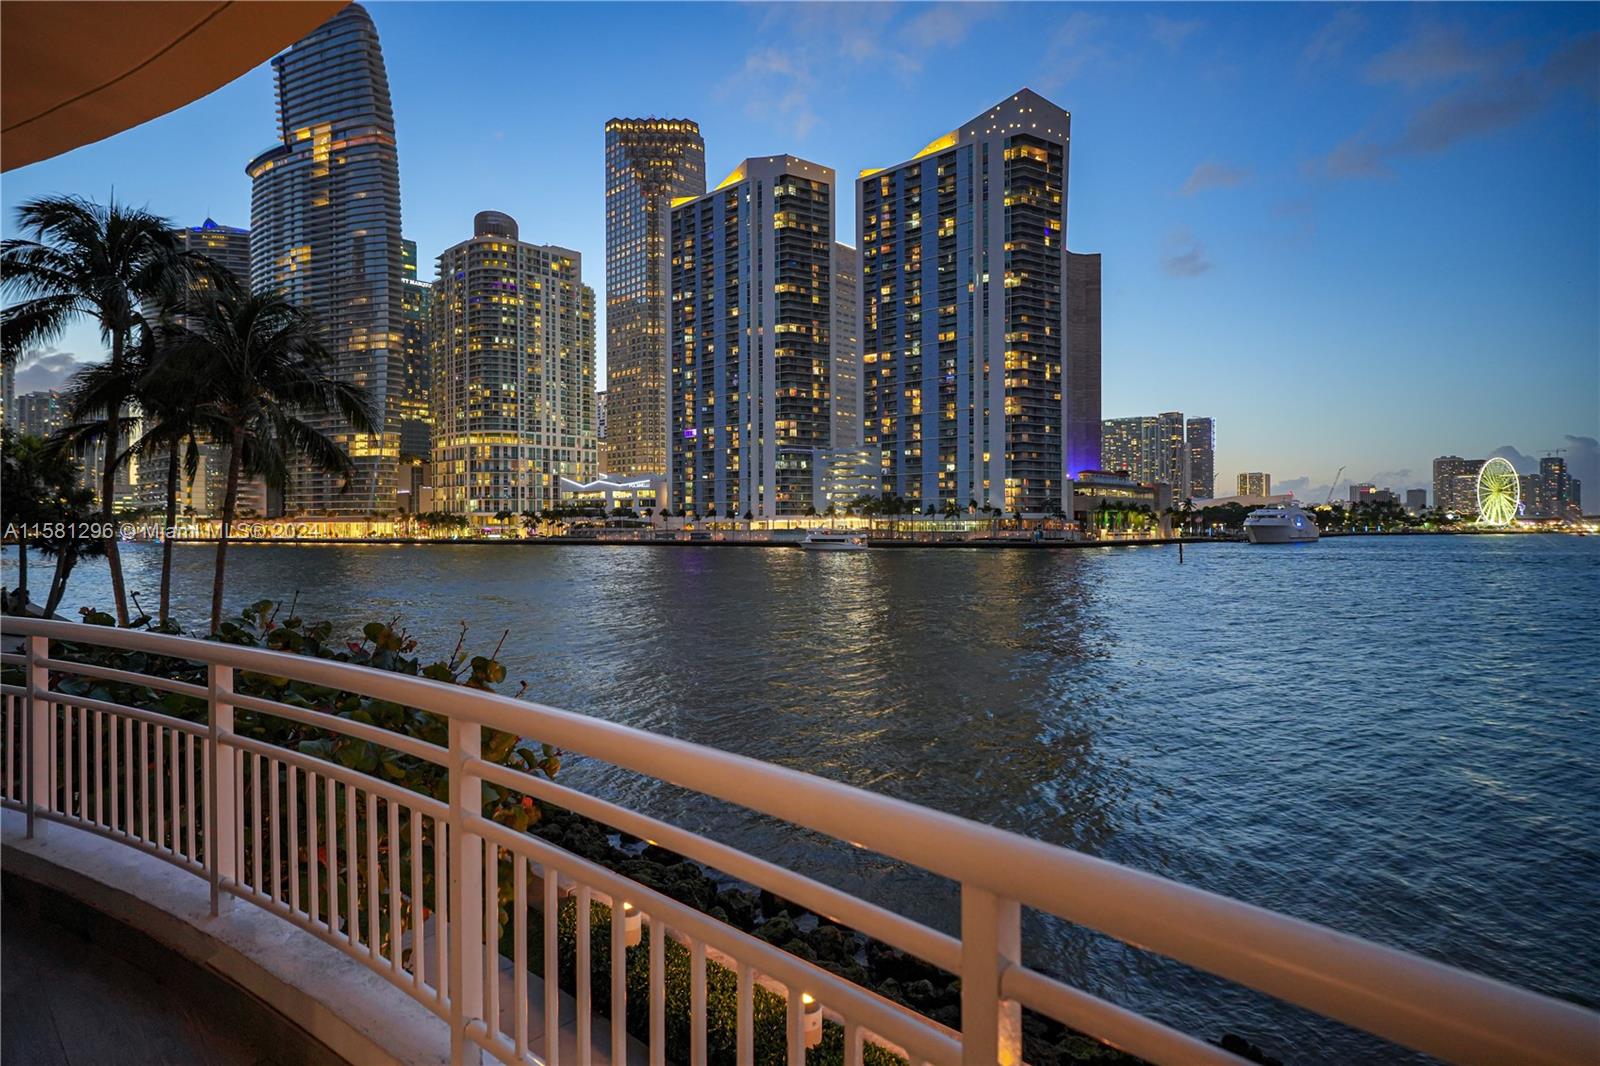 This spectacular home on the water is one of the most unique properties in Miami. This fully renovated turn key property sits right above Biscayne Bay, offering the best views Miami has to offer. This completely remodeled home offers you a private 2 car garage on the same level. The waterfront home features a chefs kitchen, 4.5 baths. Private office space. Split plan. Top of the line finishes. This luxurious island home is located in exclusive Three Tequesta Point offering top amenities. 24 hour security, concierge, free valet, guardhouse, Bayfront pool, multi level fitness center, Tennis Court, Basketball Court, 2 racquetball courts, conference rooms, game room, childeren rooms. The island offers the best security to live in a home on the water in the middle of the best Miami can offer.